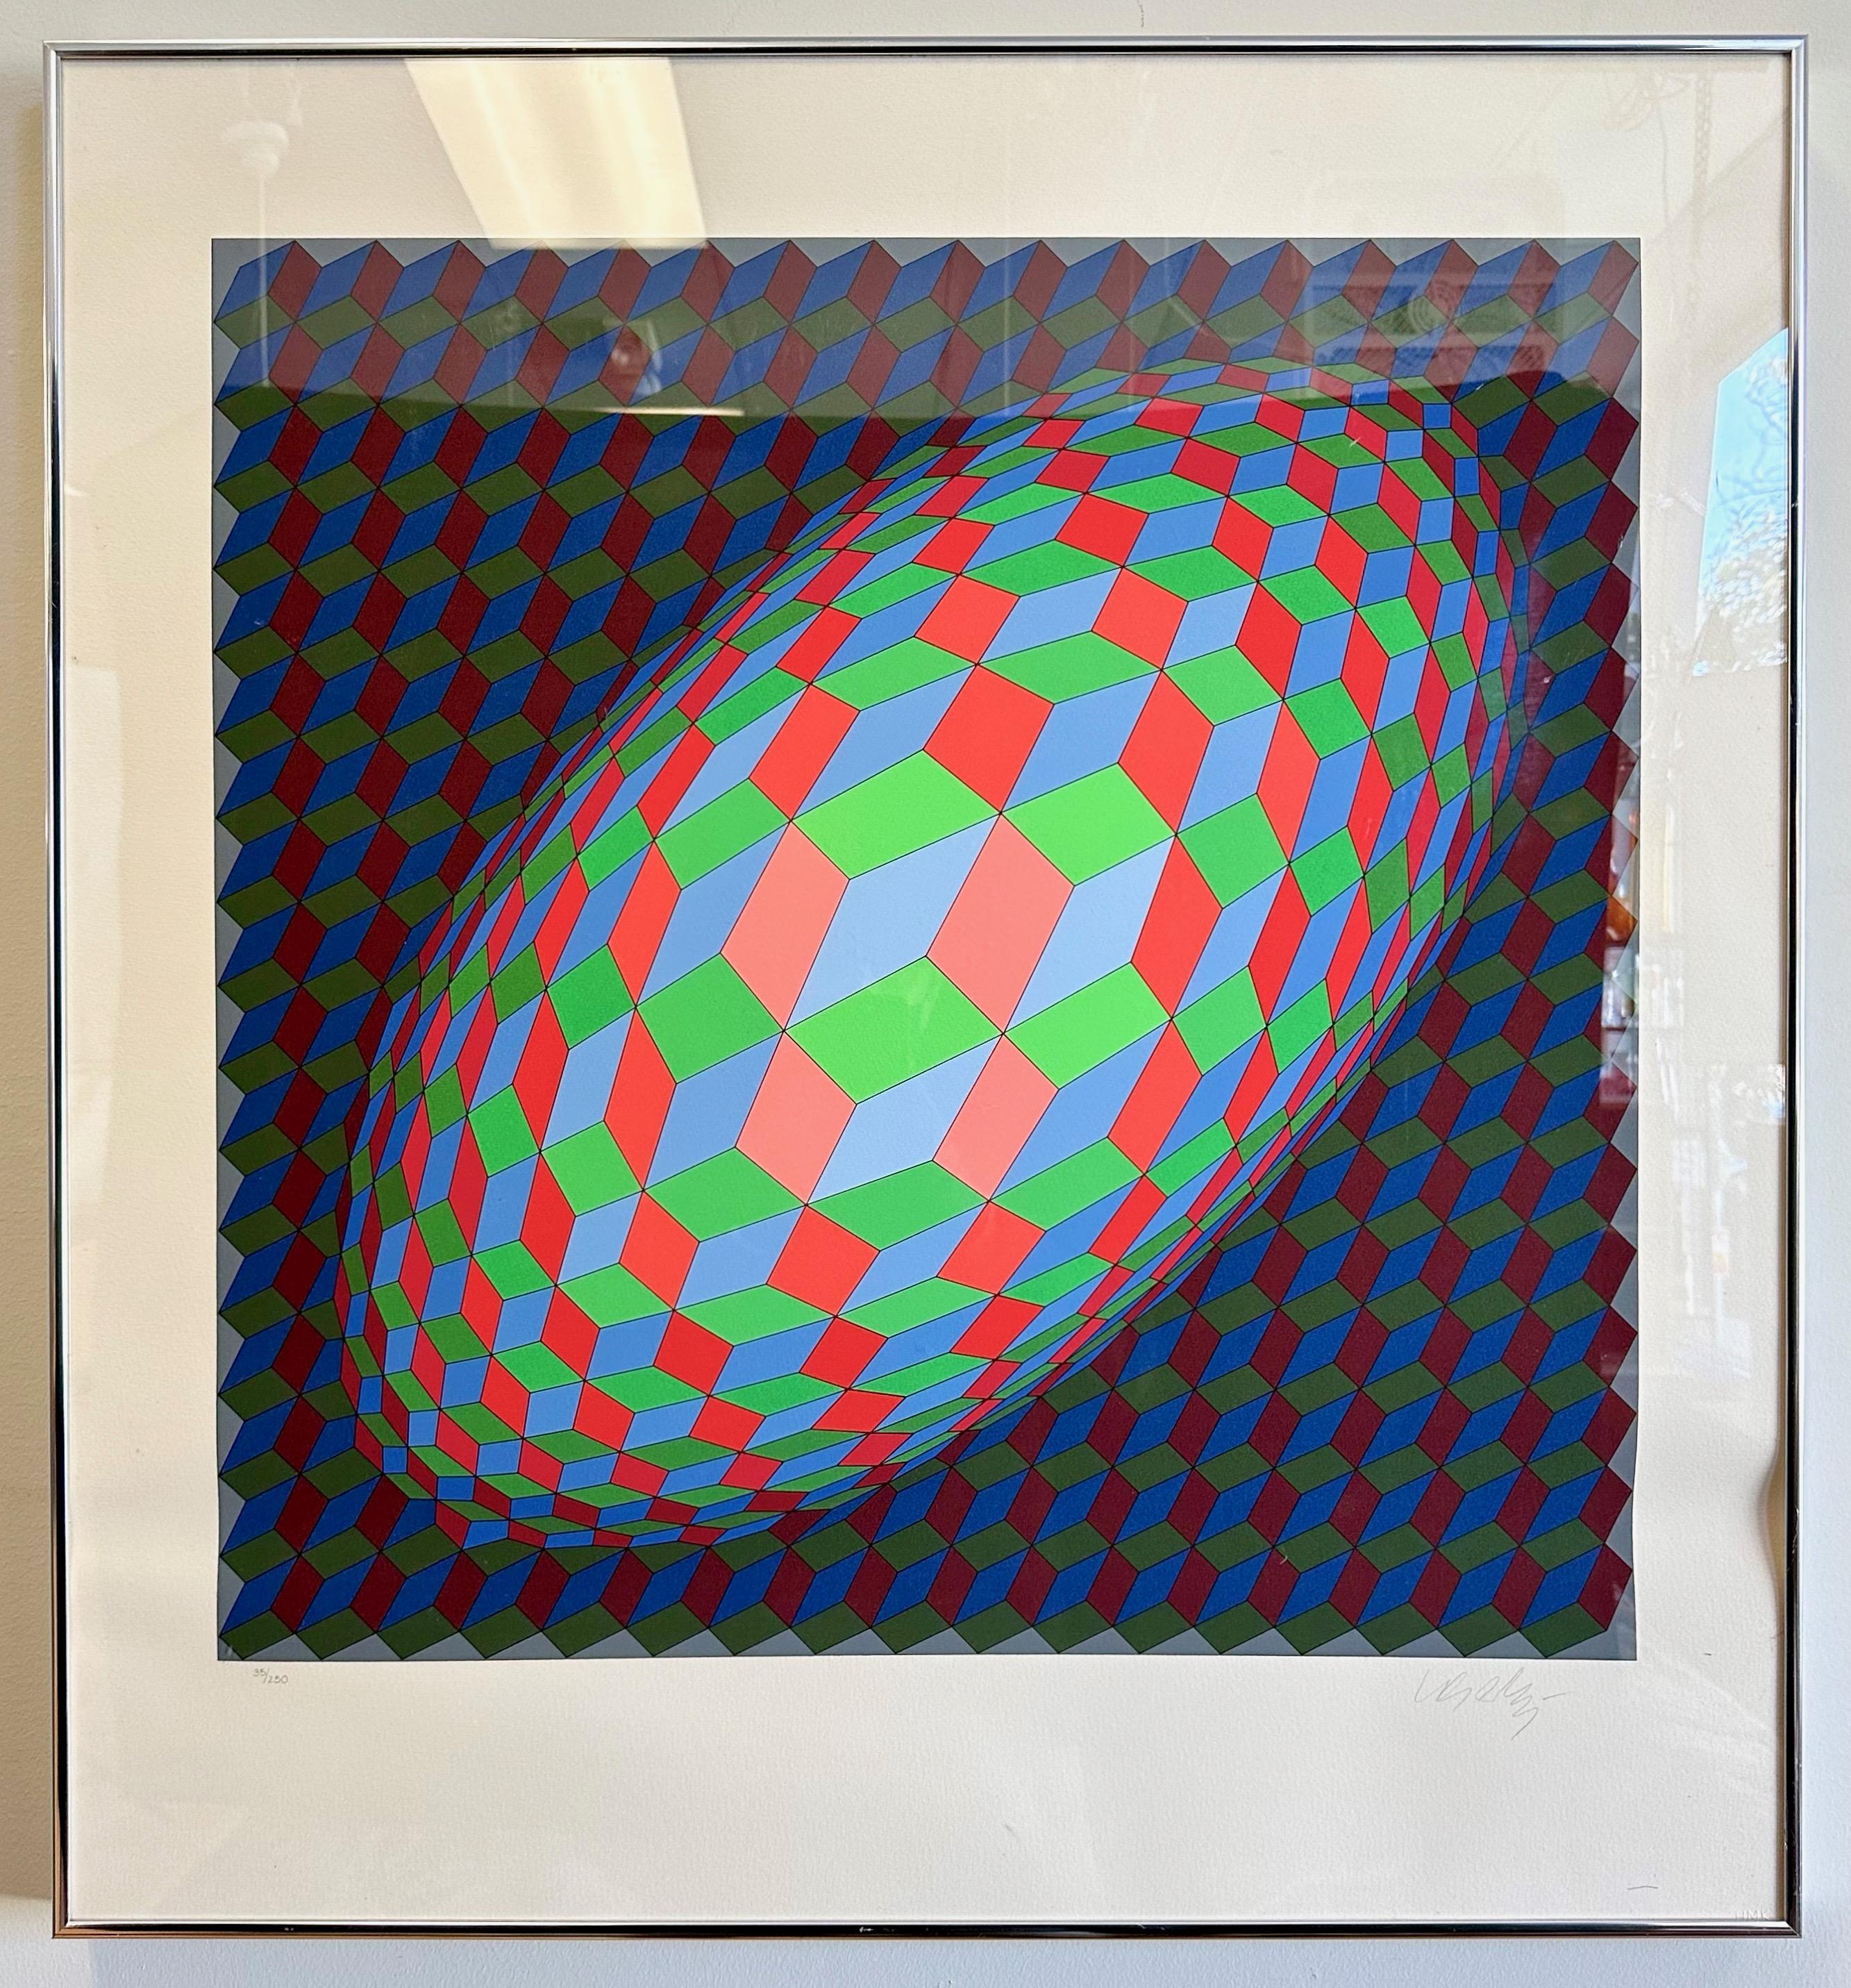 A 1970s framed Victor Vasarely limited edition Op art serigraph titled “Torony III”, signed and numbered 35/250.

Three-dimensional ovoid shape comprised of warped fluorescent red, green, and blue stepped blocks of varied brightness that call to